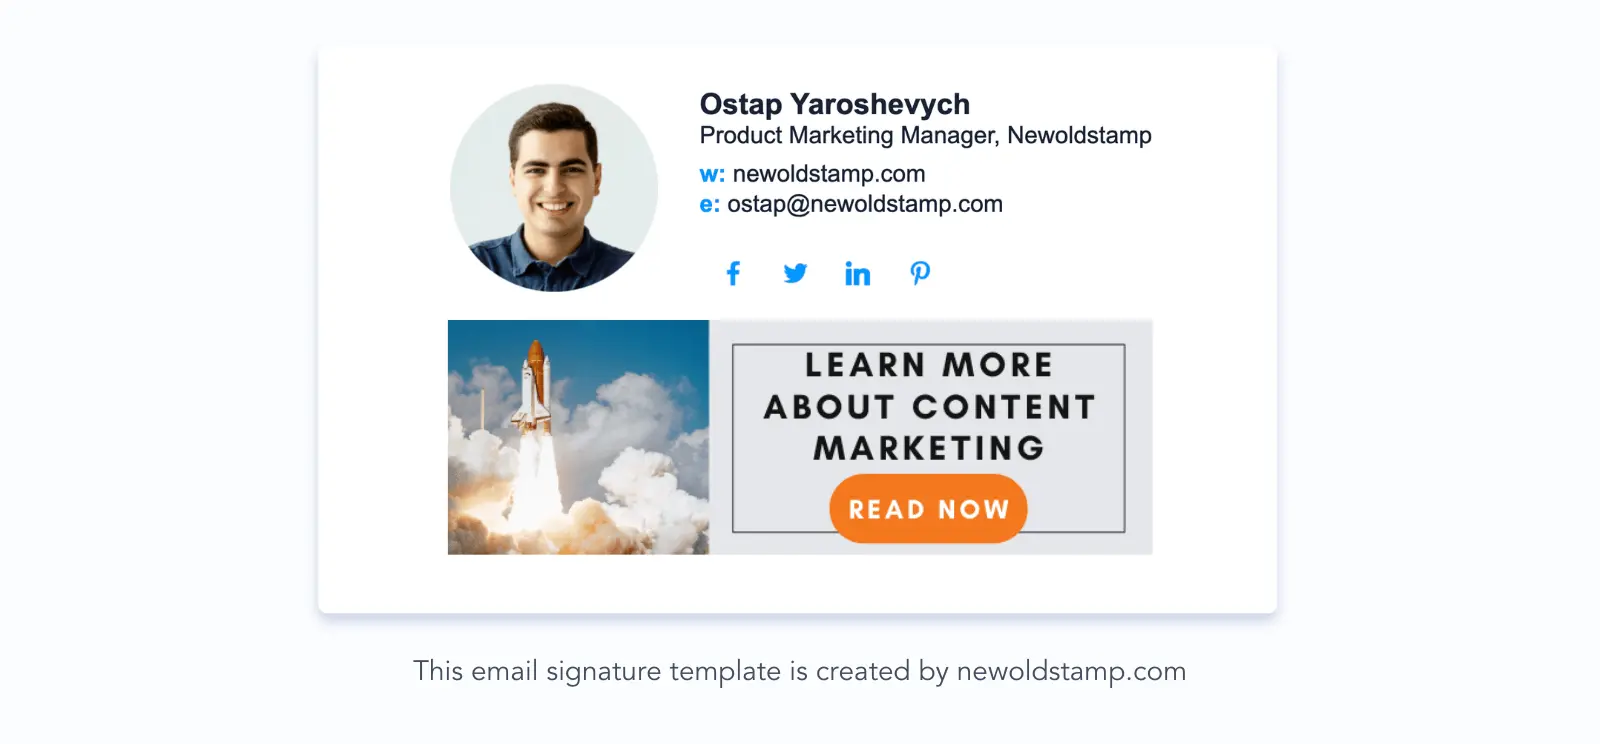 Email signature with a promotional banner